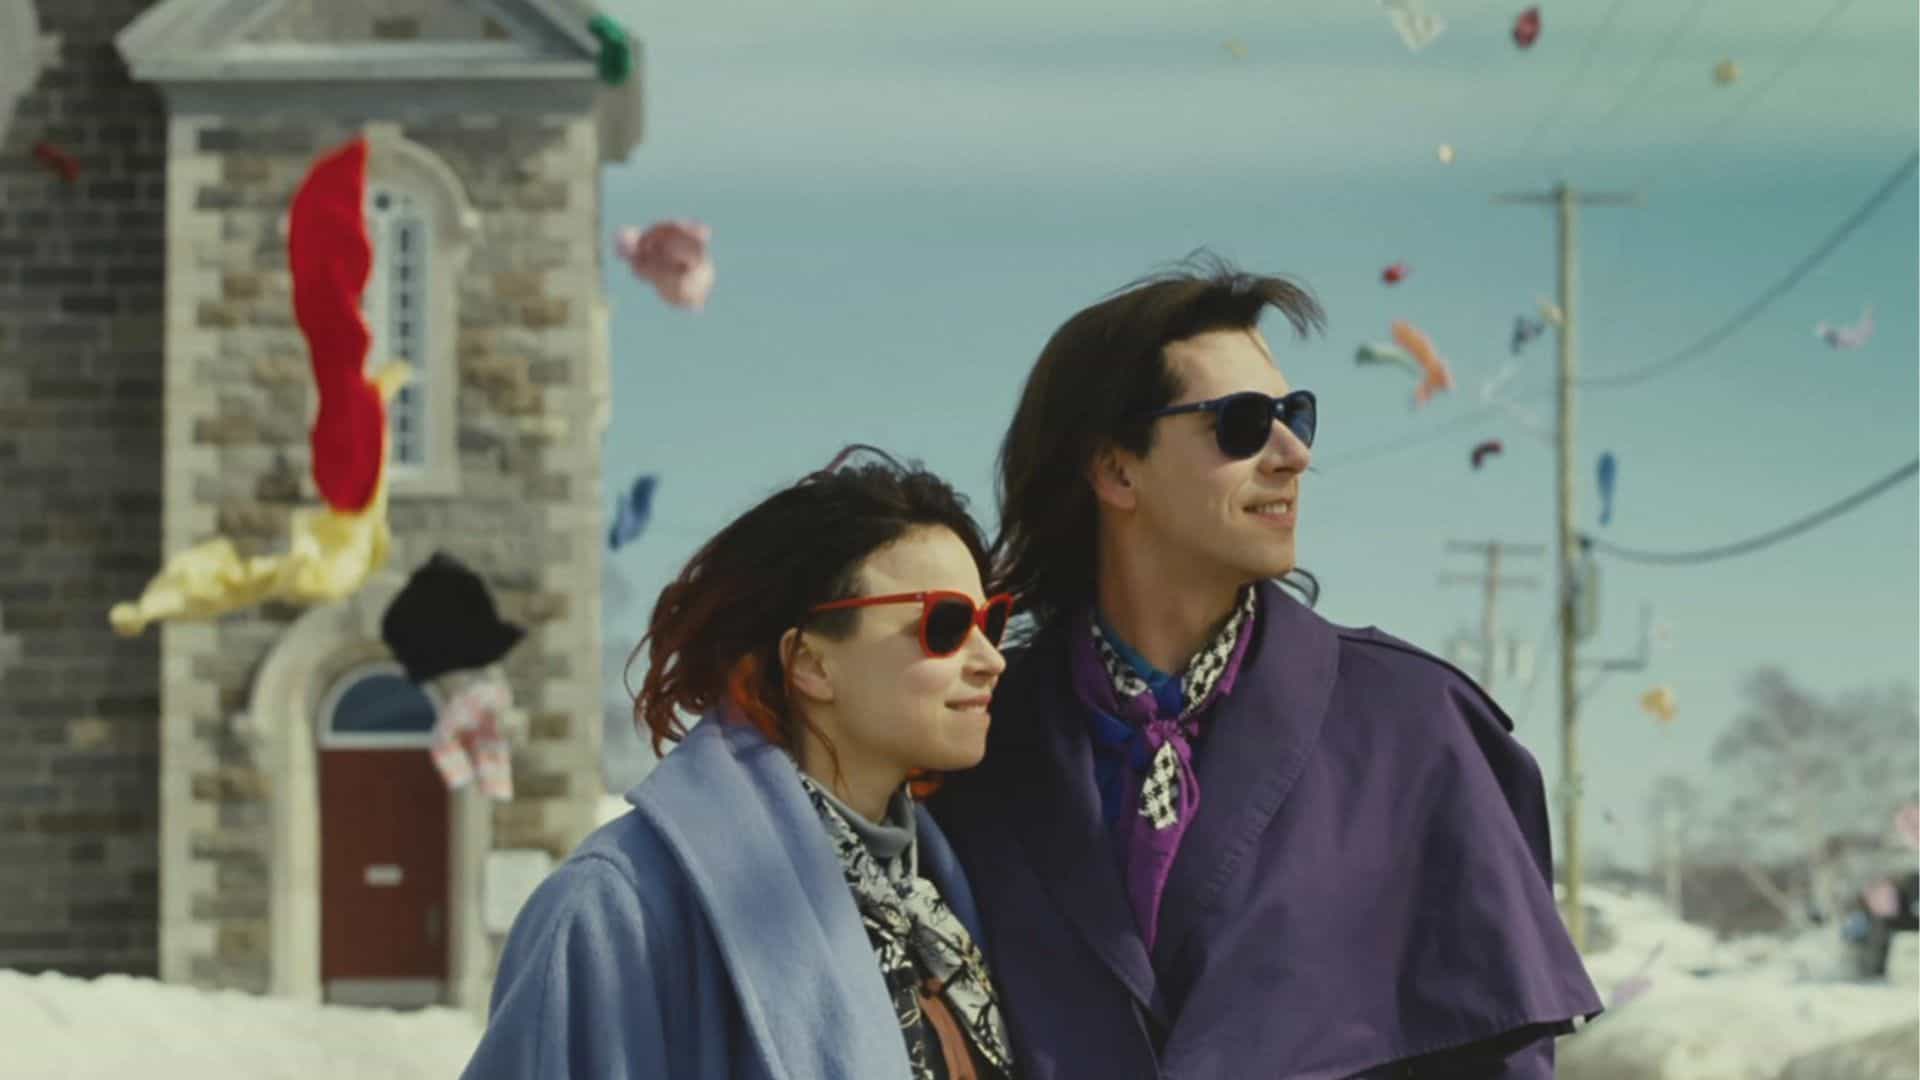 Fred and Laurence in sunglasses on a day out in this image from Lyla Films.